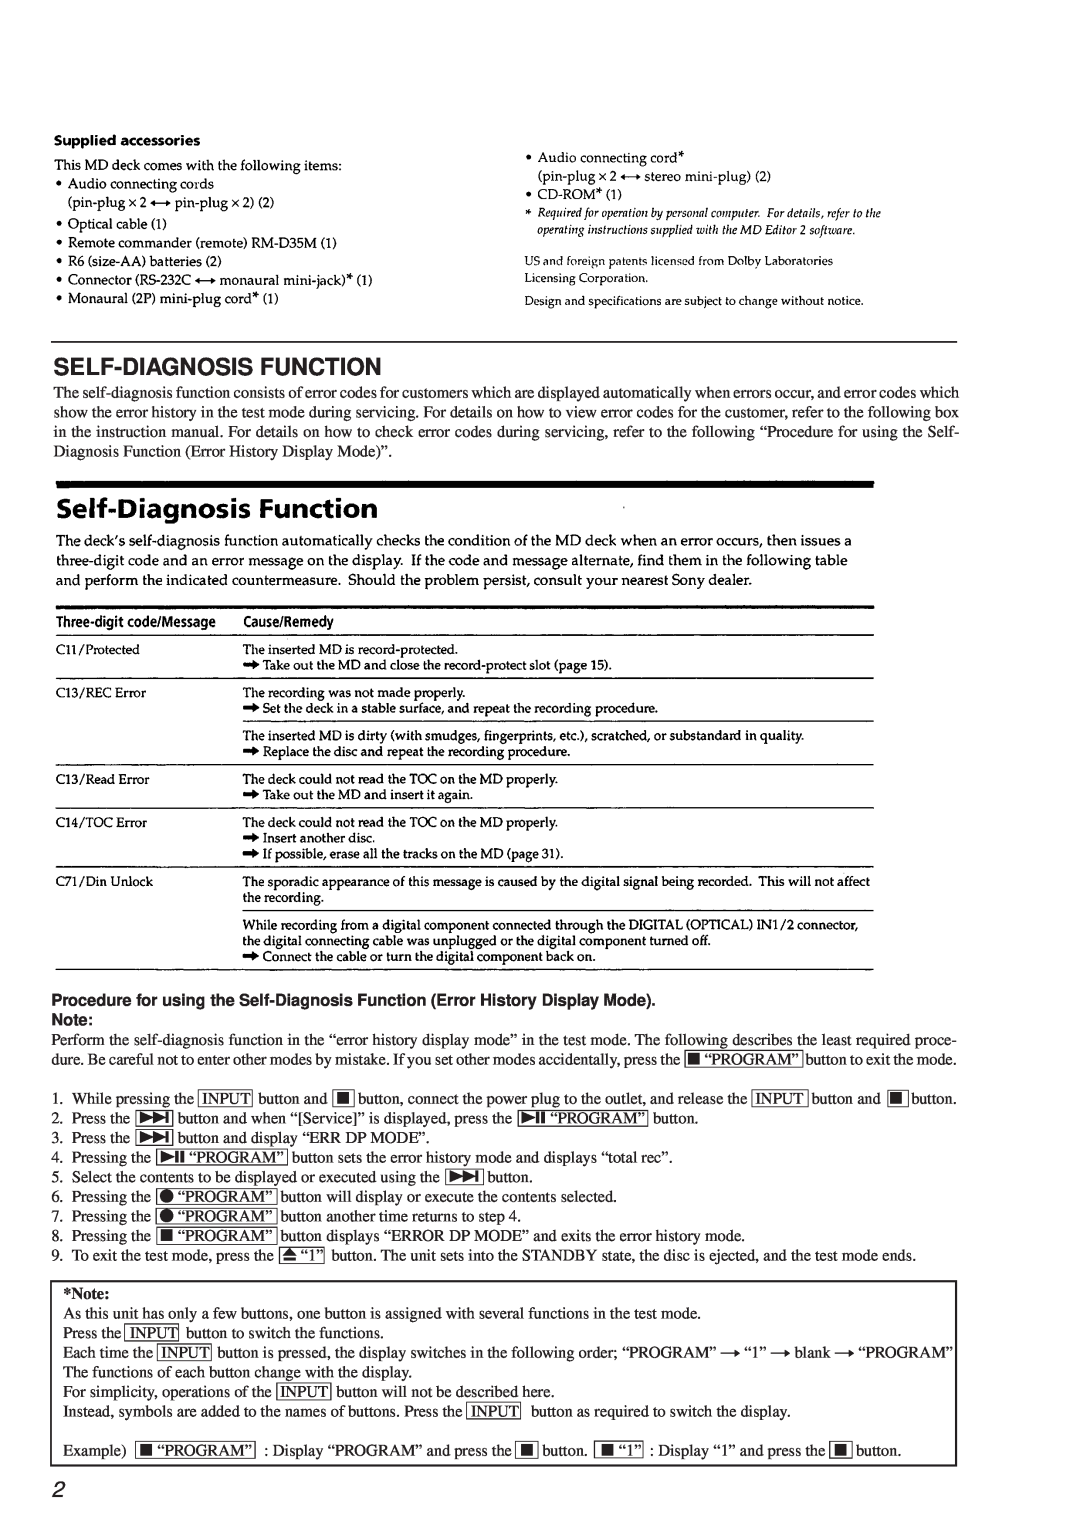 Sony MDS-PC2 service manual Self-Diagnosisfunction 